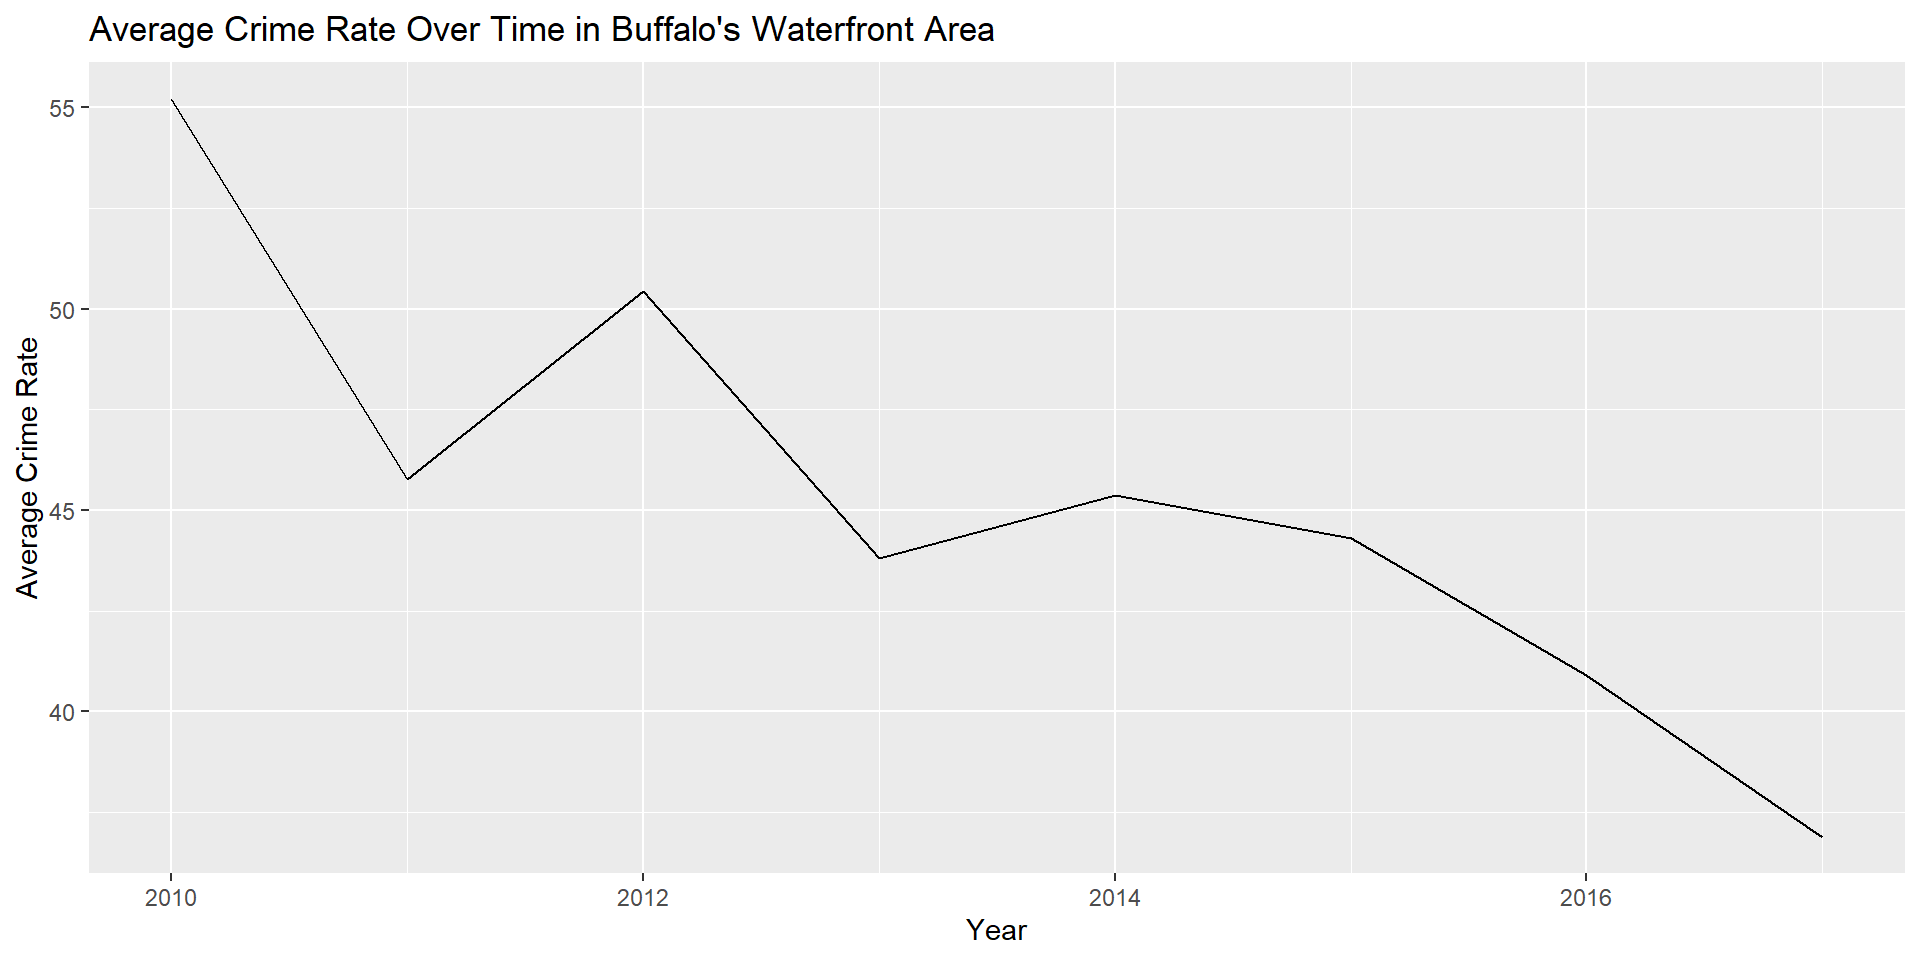 Average crime between 2010 and 2017 in Buffalo's Waterfront Area